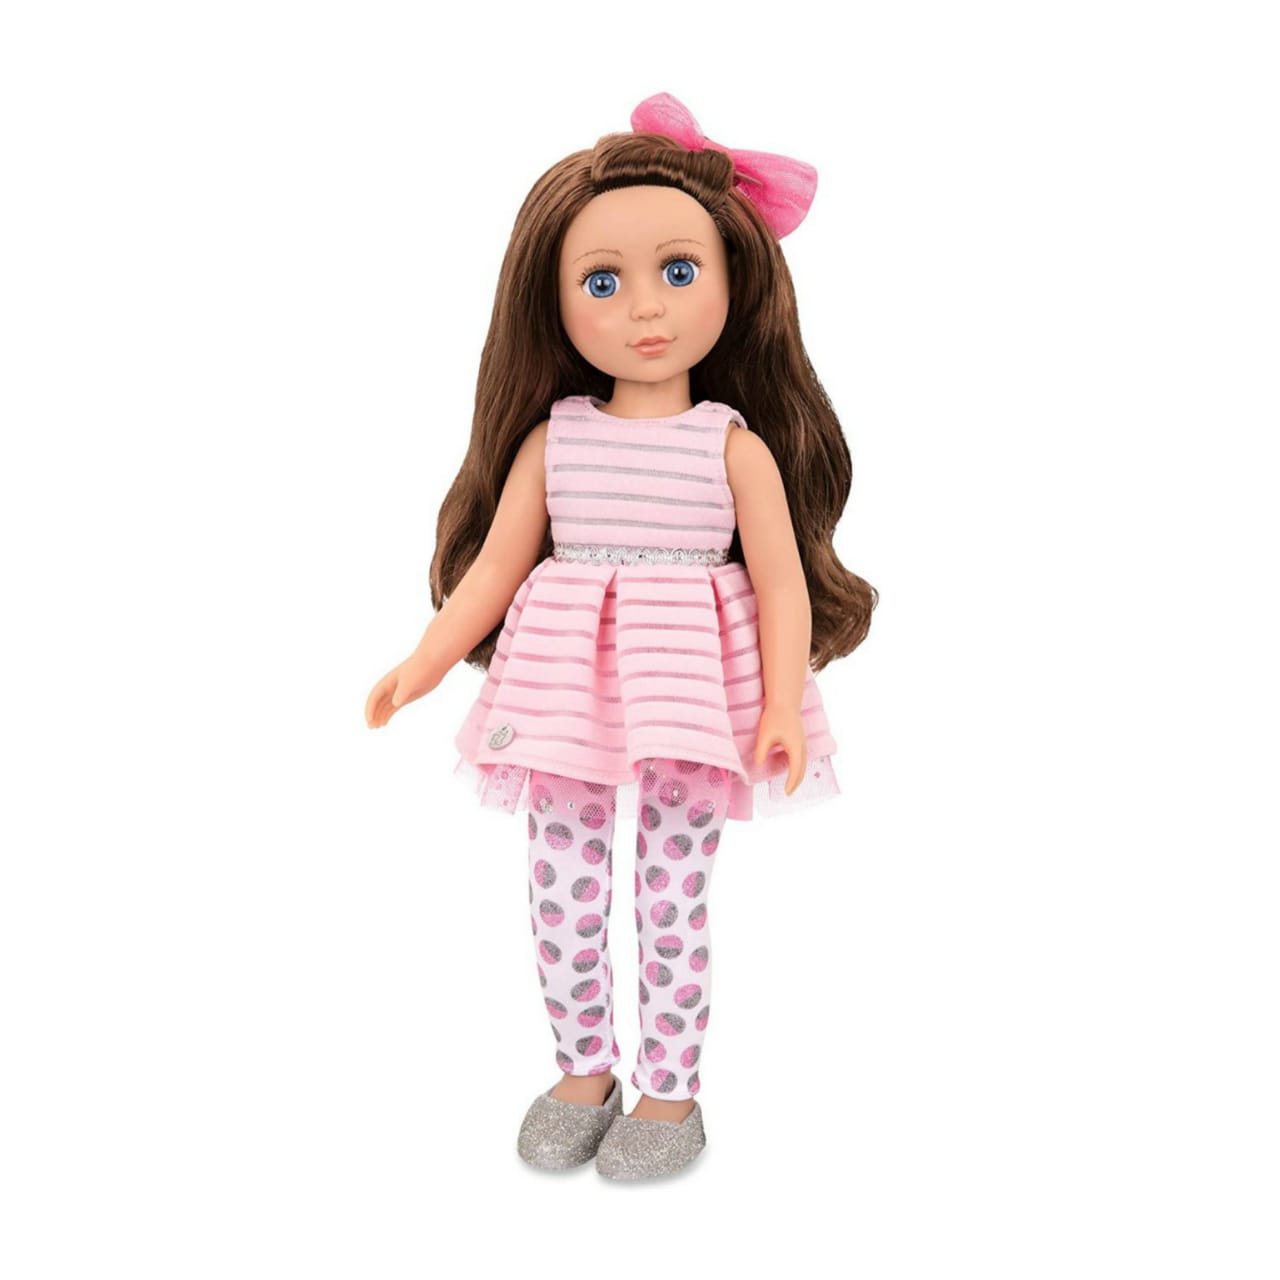 Glitter Girls Doll by Battat Poseable Fashion Doll - Bluebell - Toys 4 You